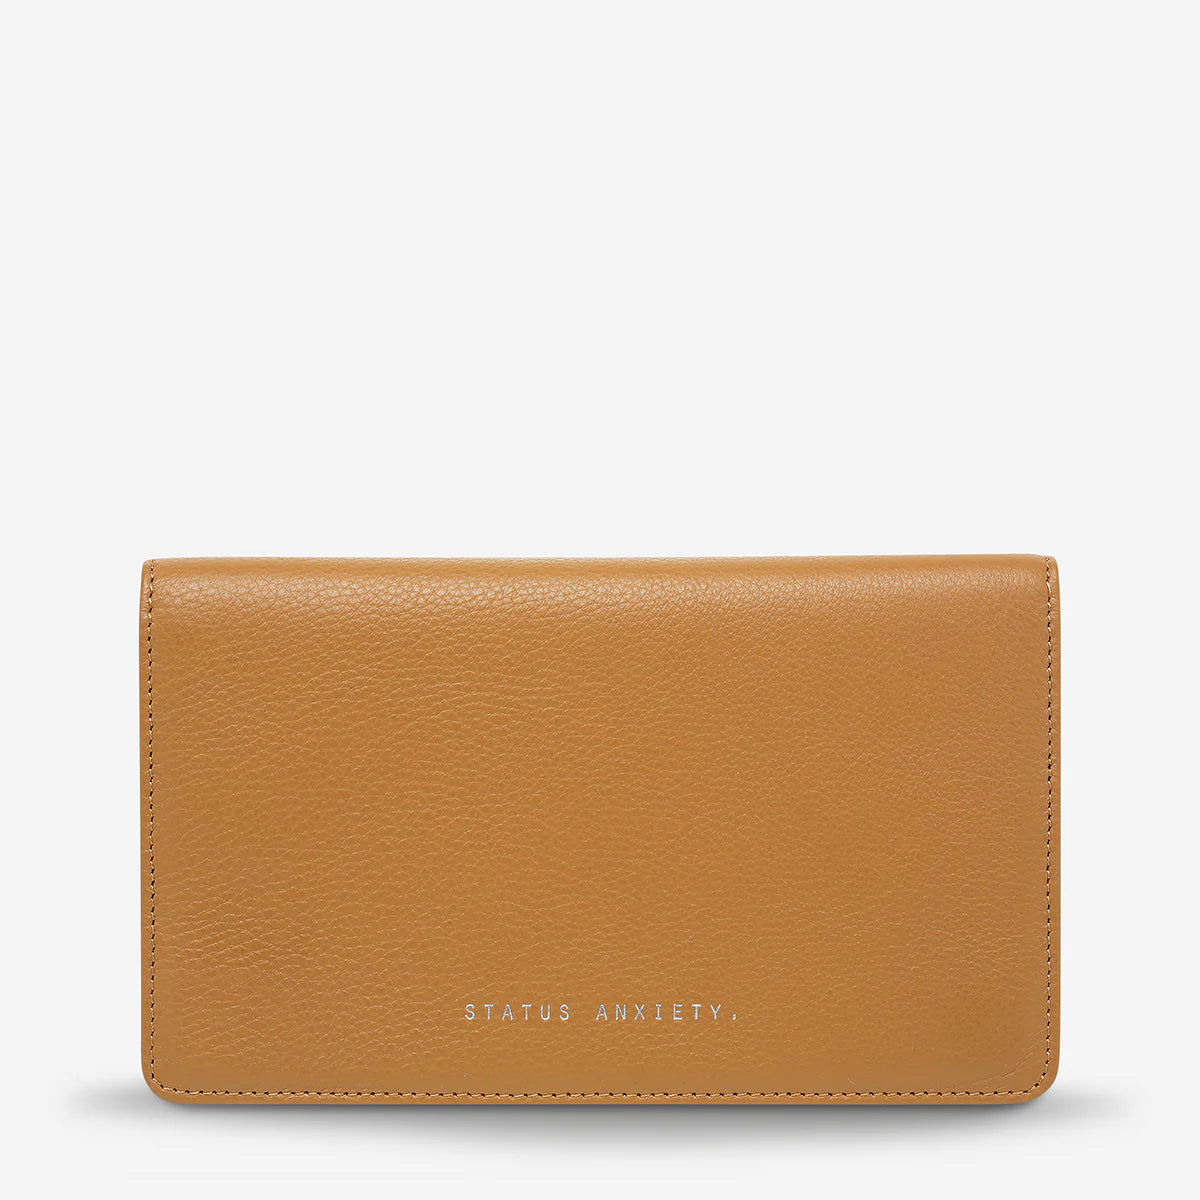 Status Anxiety Living Proof Wallet